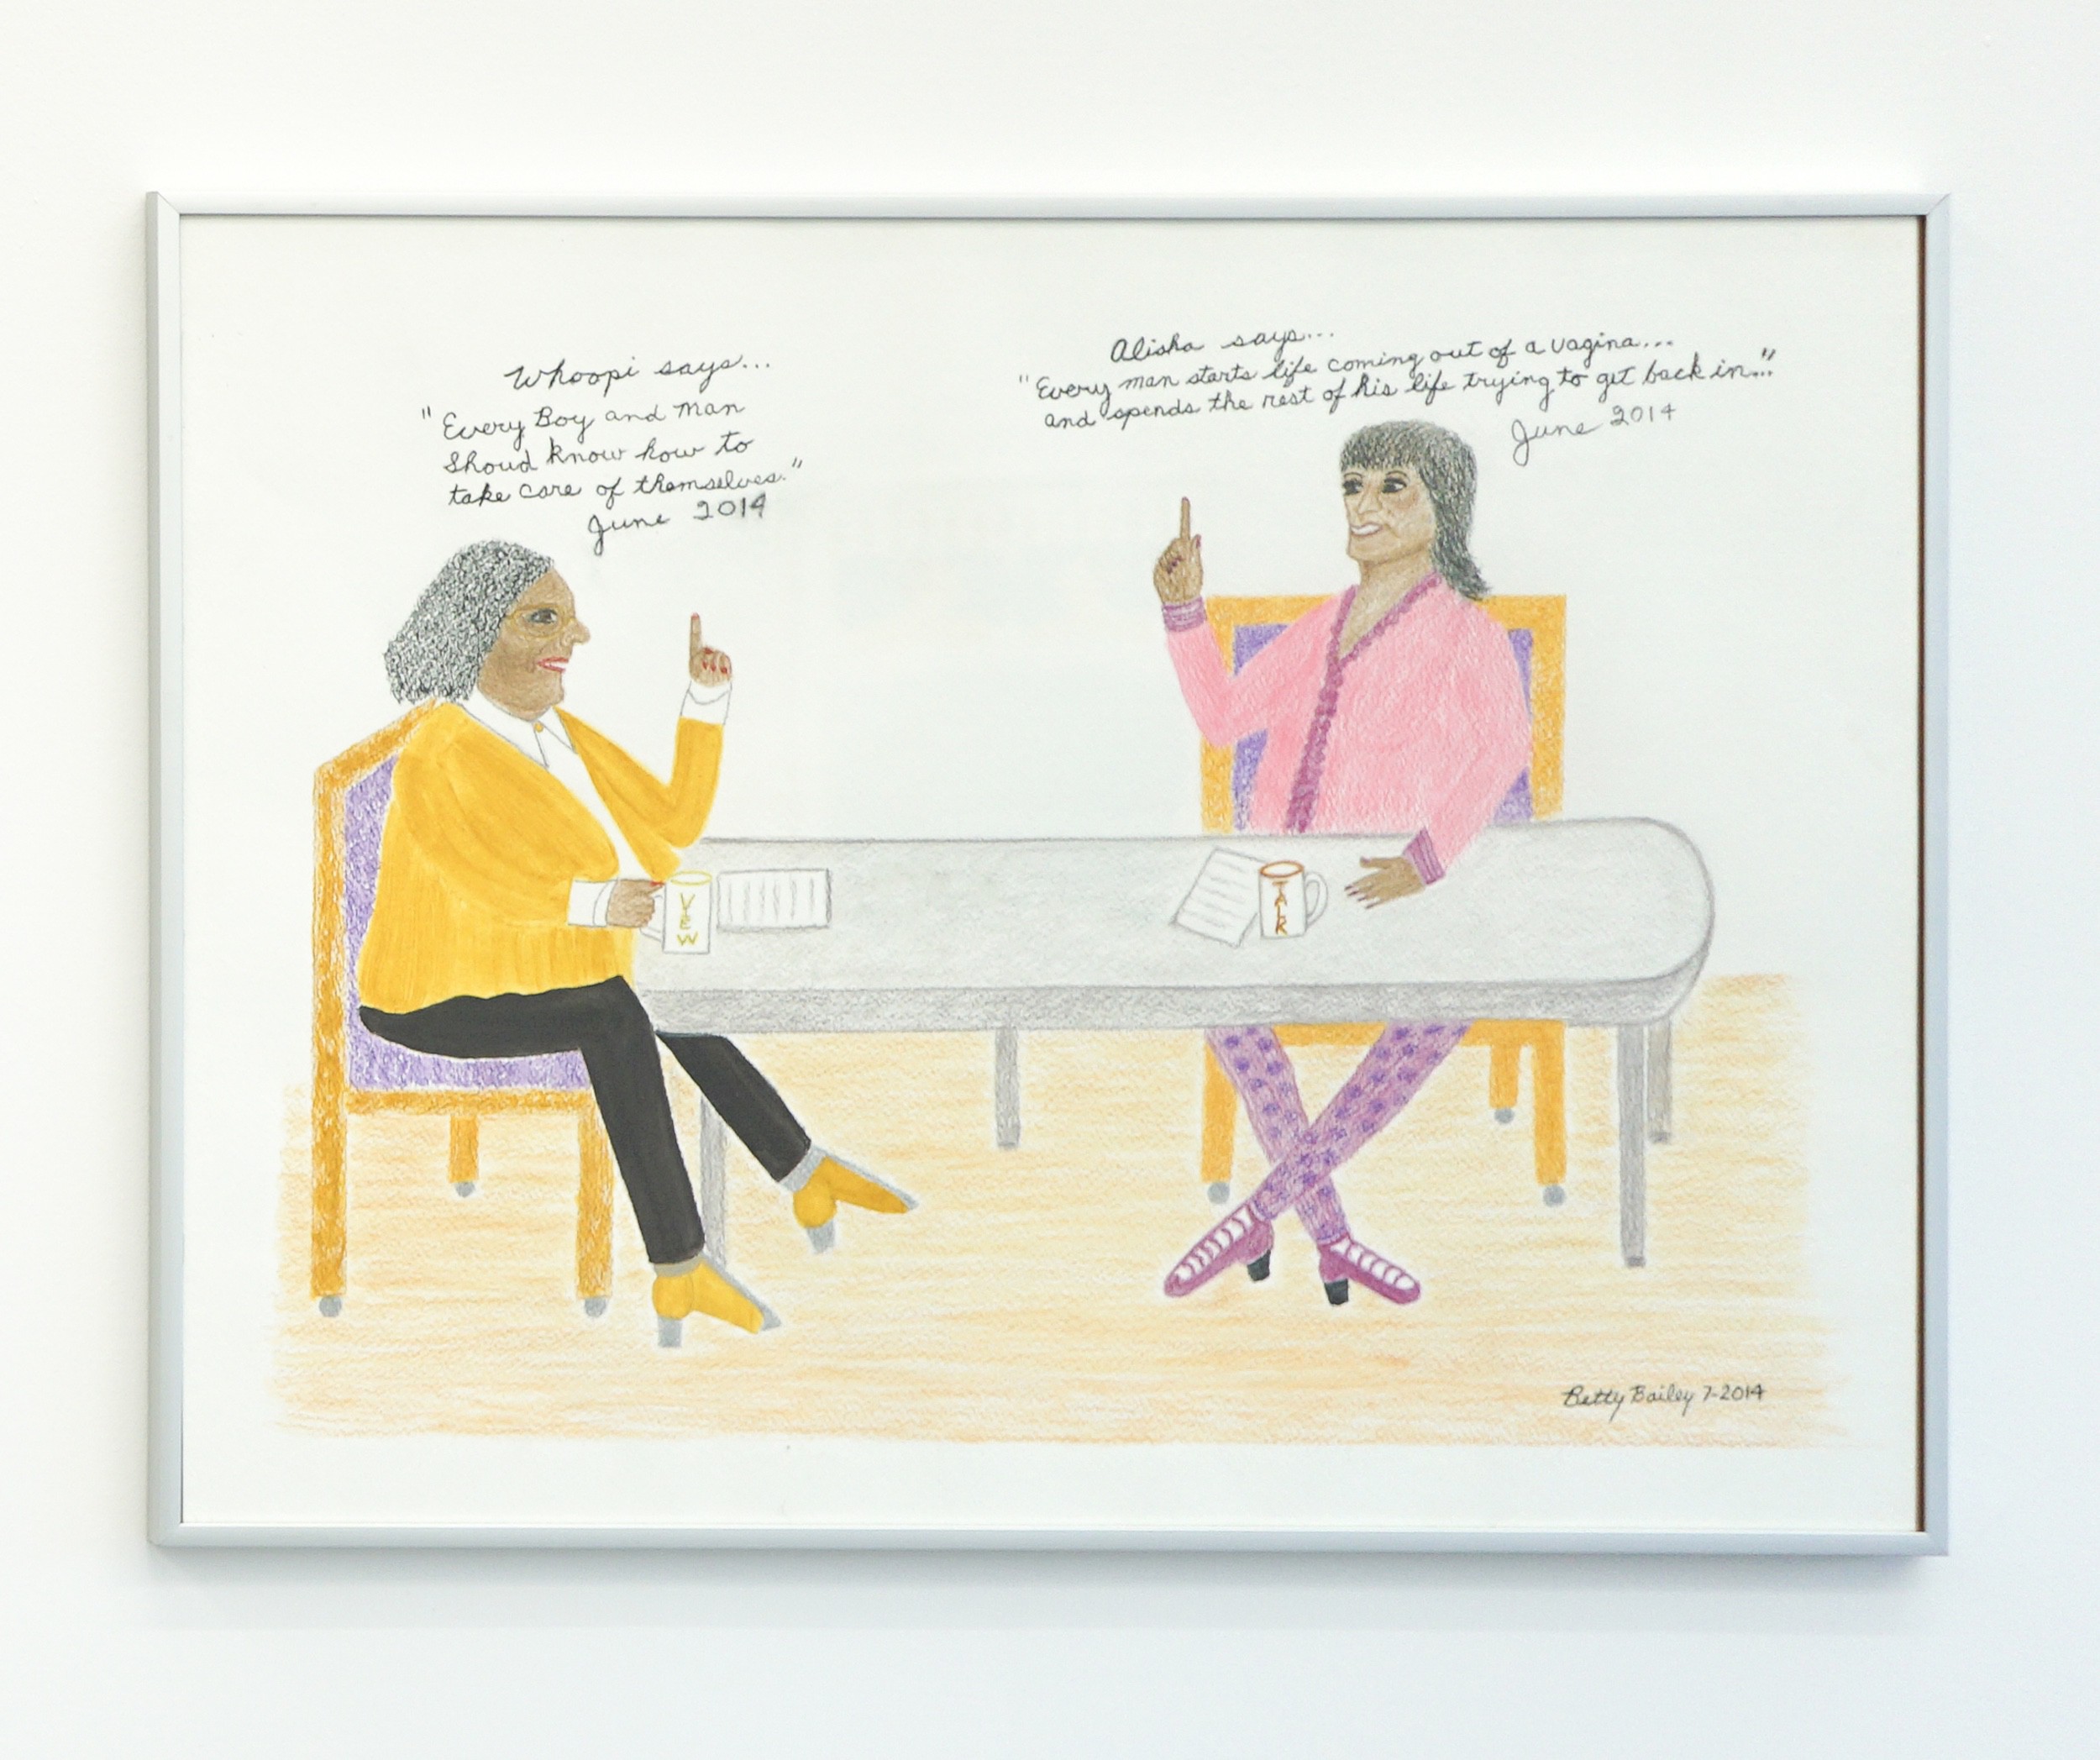  Betty Bailey  Whoopie and Aisha , 2014 Colored pencil and gouache on paper 18 x 24 inches 